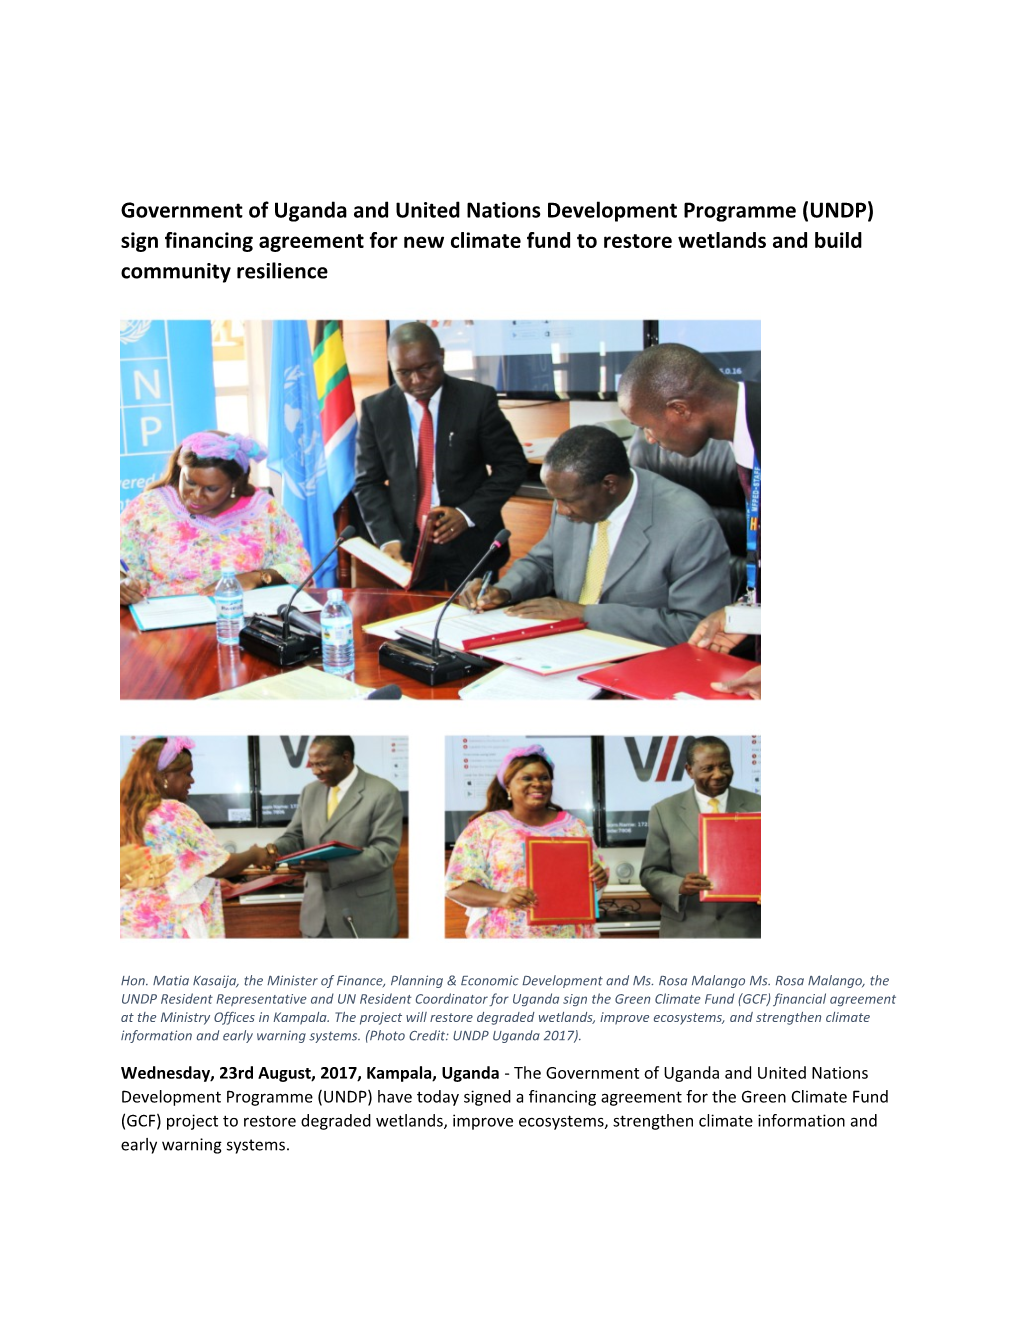 Government of Uganda and United Nations Development Programme (UNDP) Sign Financing Agreement